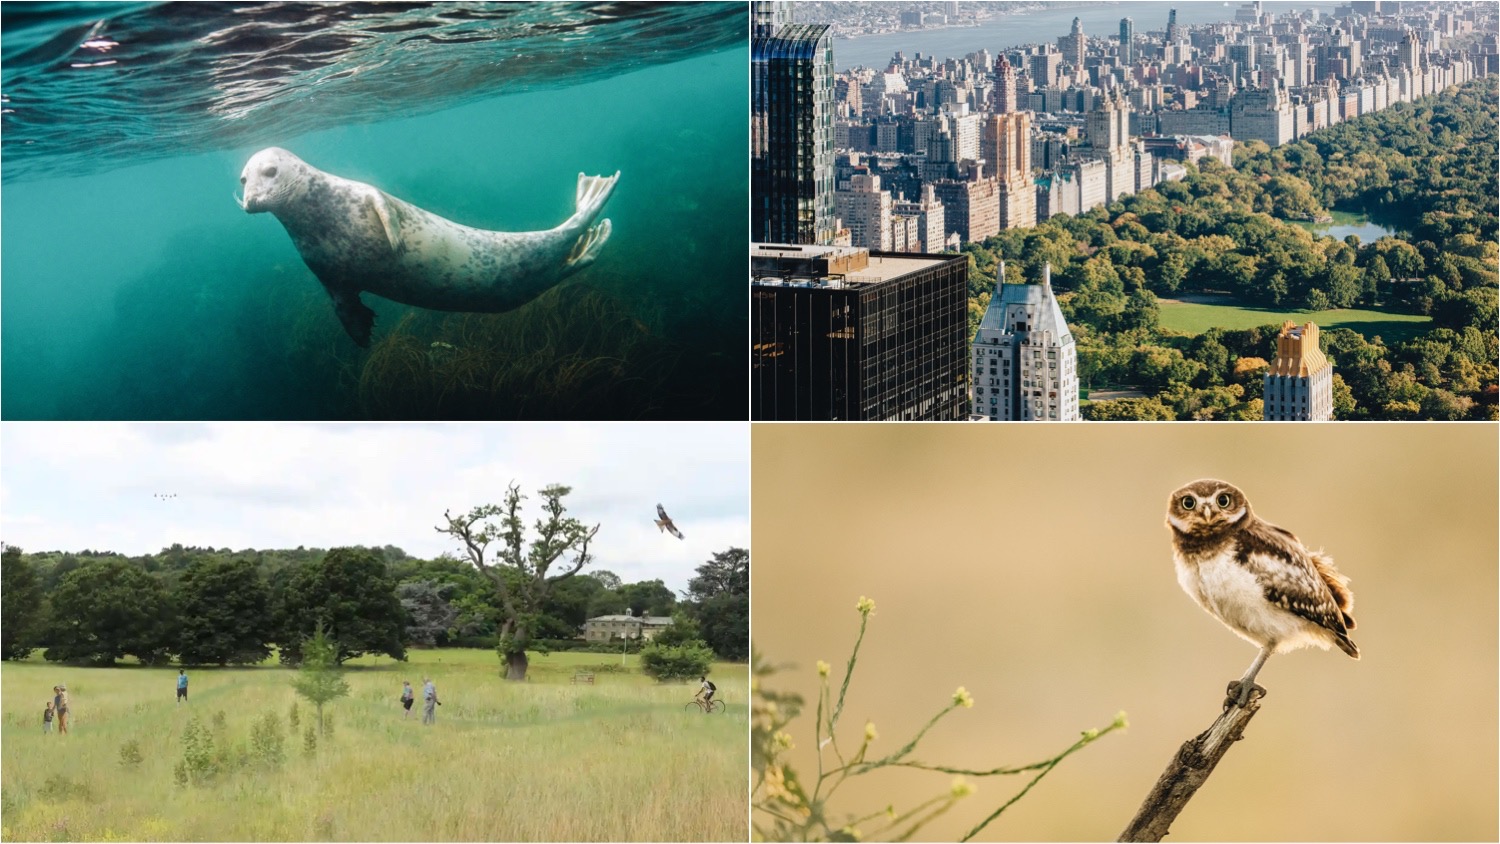 Clockwise from top left: a seal swimming underwater, Central Park, and a rewilded area of grassland in the UK.